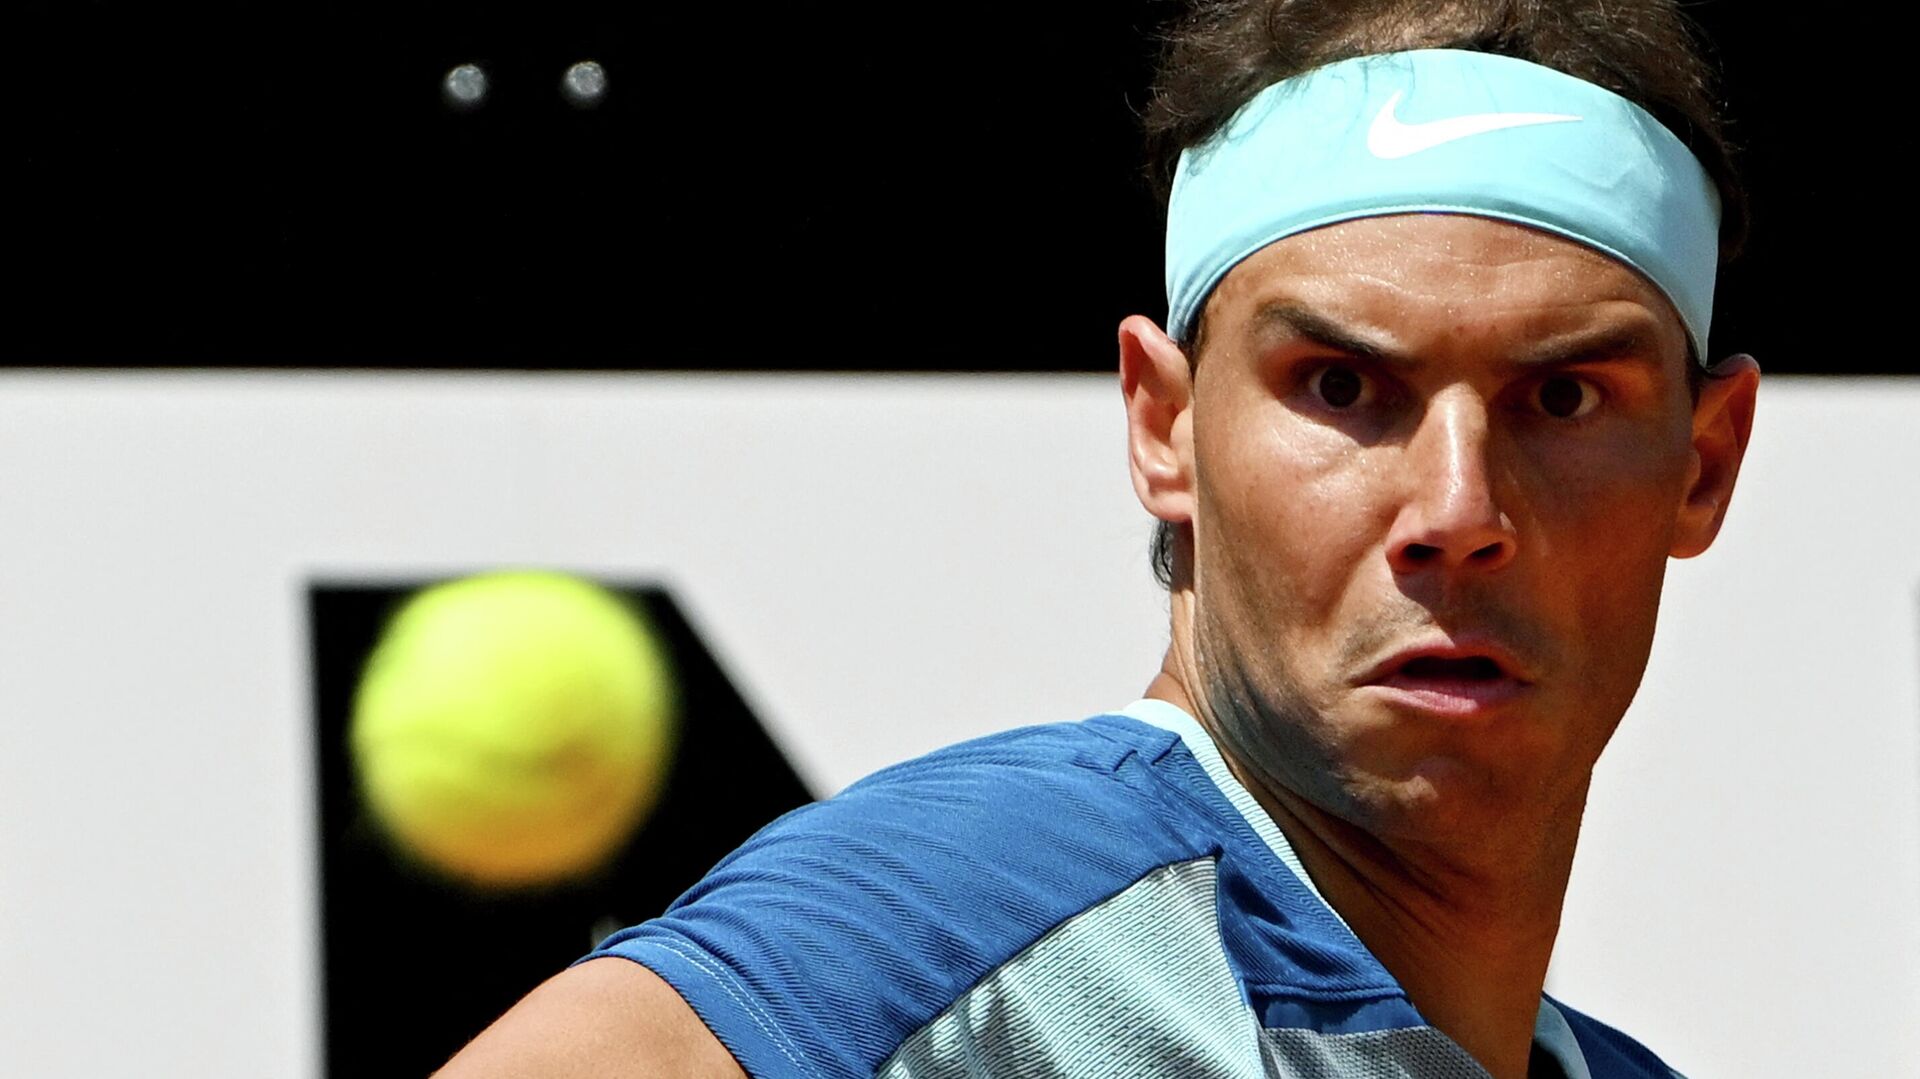 Spain's Rafael Nadal returns to USA's John Isner during their first round match at the ATP Rome Open tennis tournament on May 11, 2022 at Foro Italico in Rome - Sputnik International, 1920, 18.05.2022